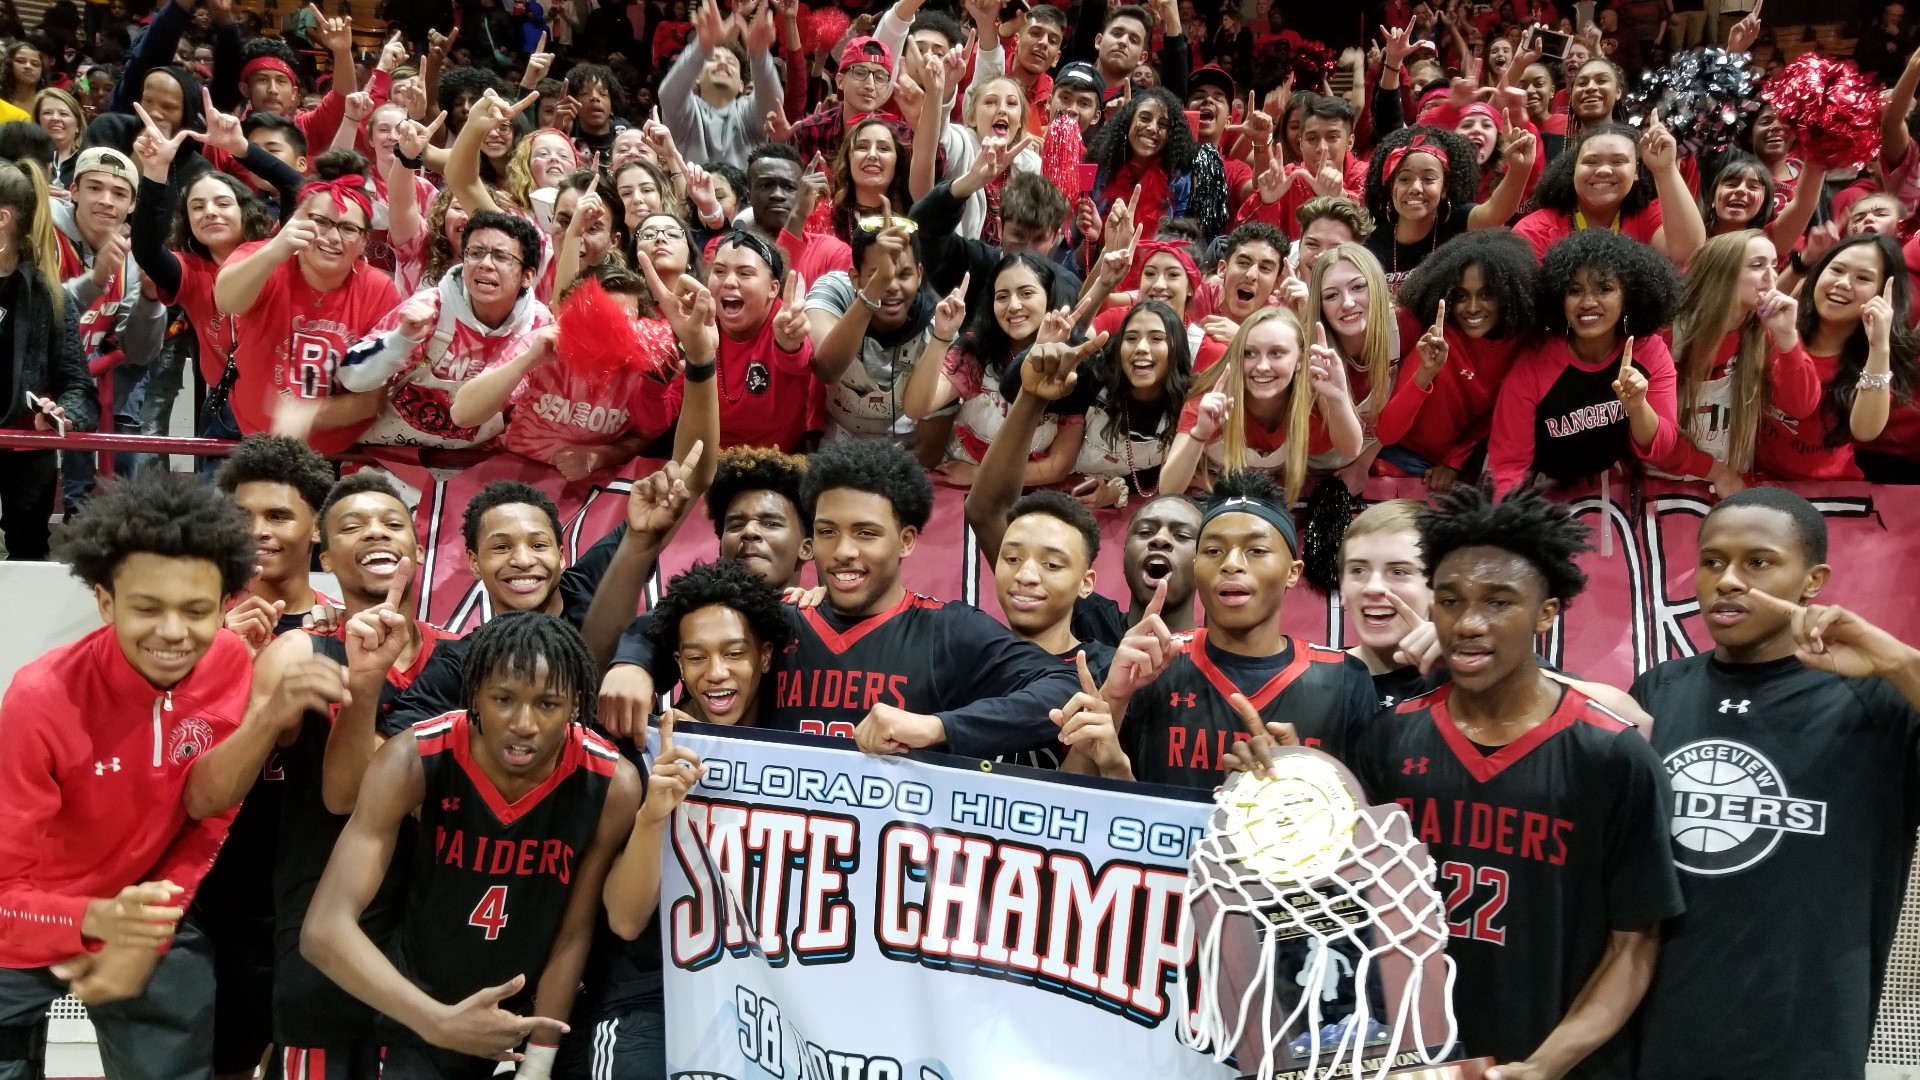 The Raiders captured their first state title in 34 years by knocking off the top-seeded Wolverines in the championship Saturday night.